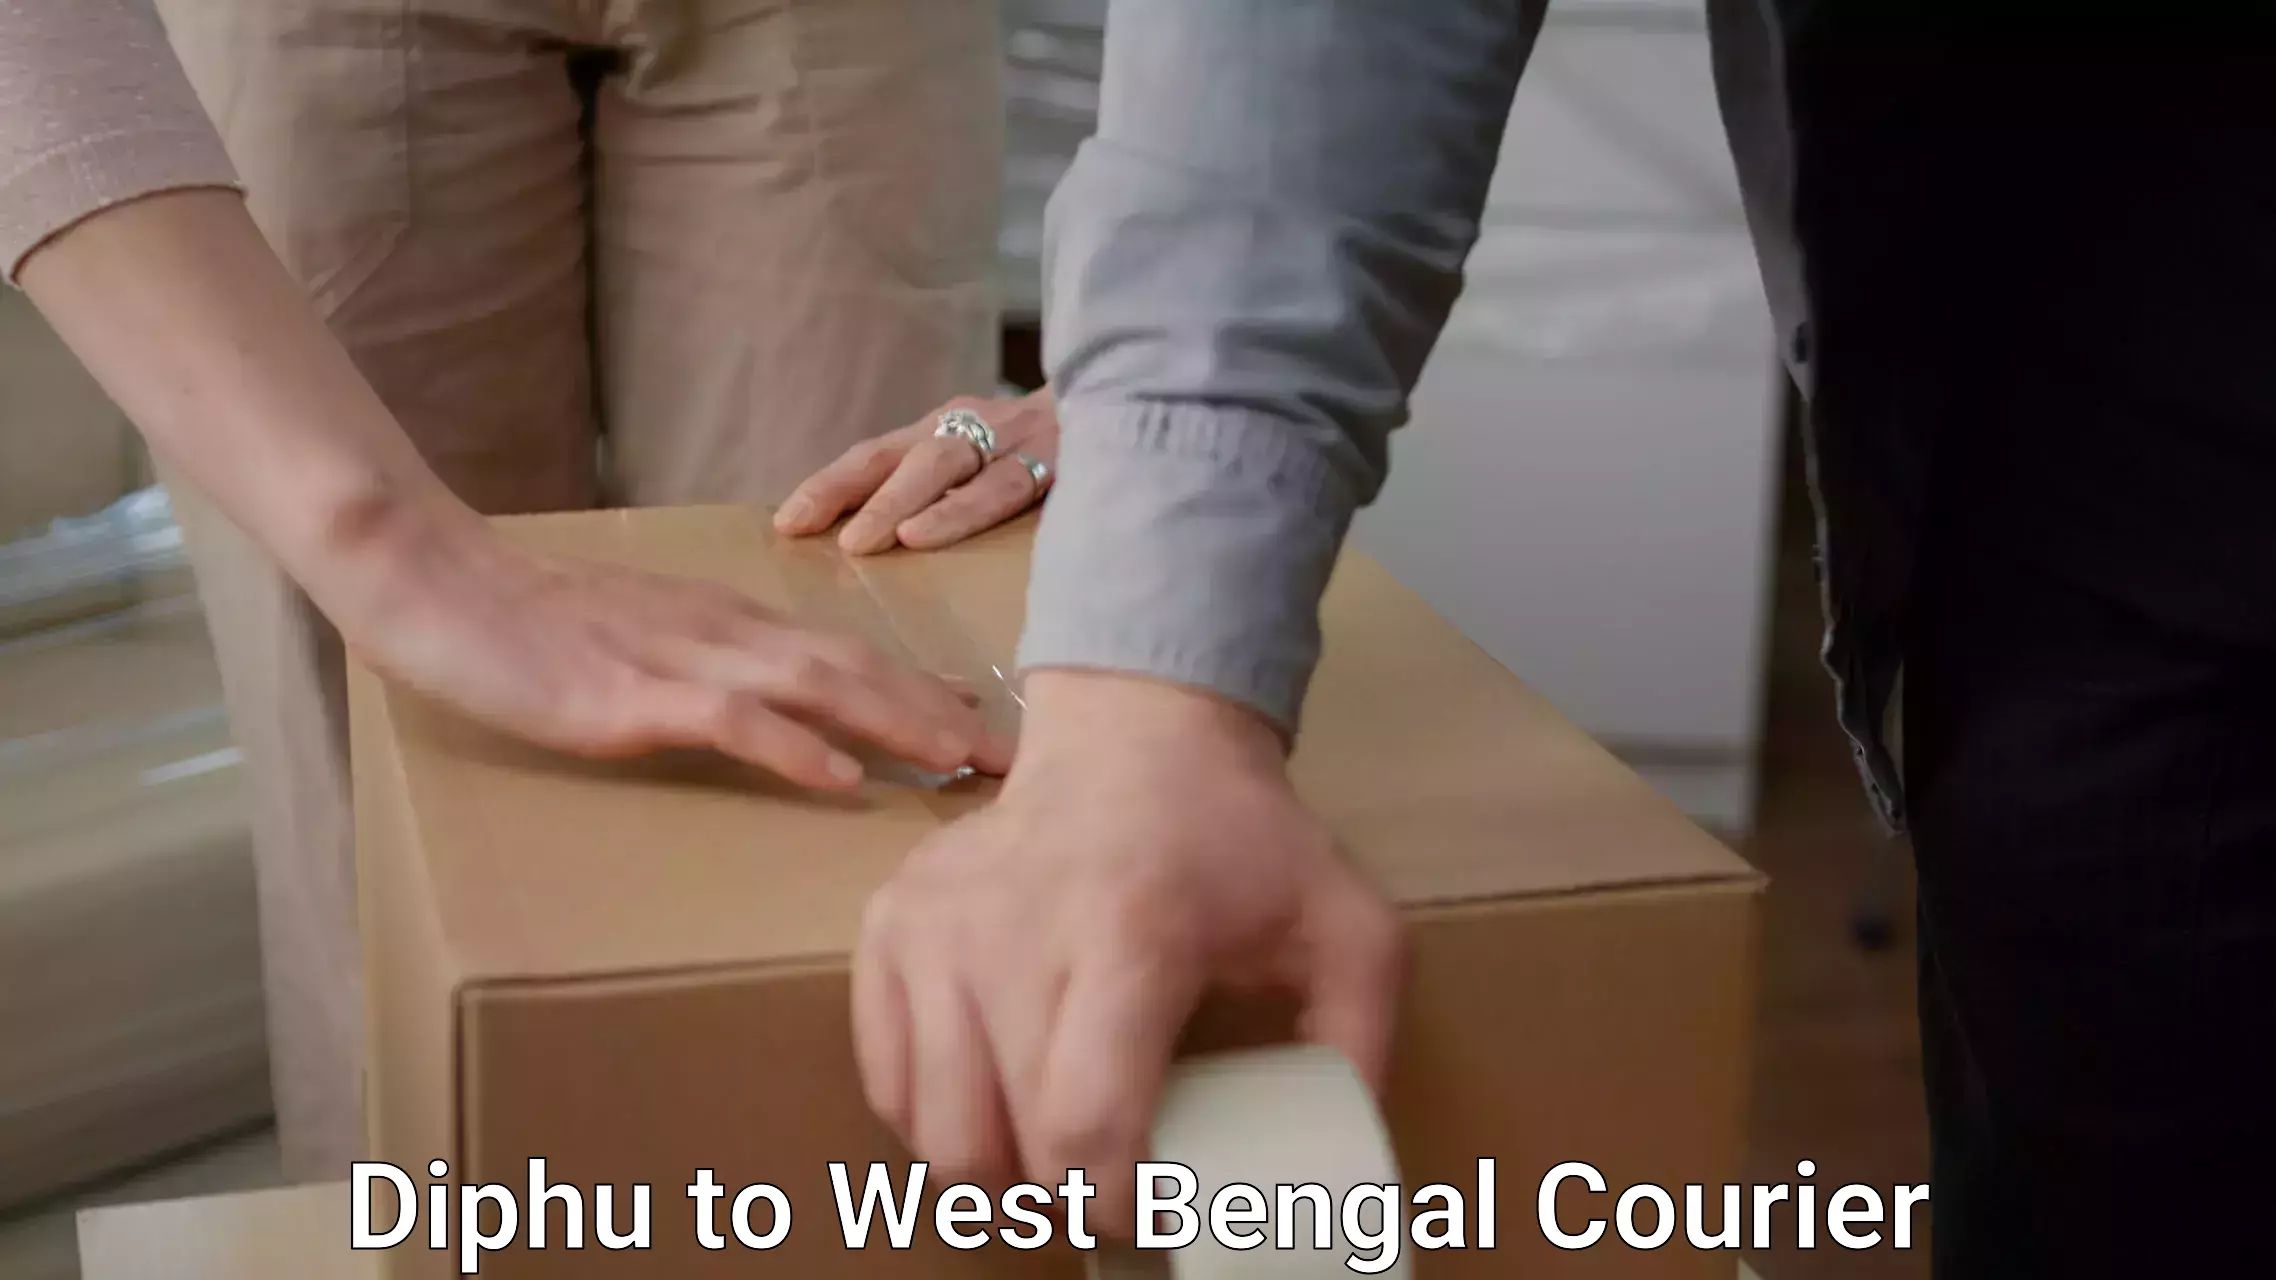 Specialized moving company Diphu to West Bengal